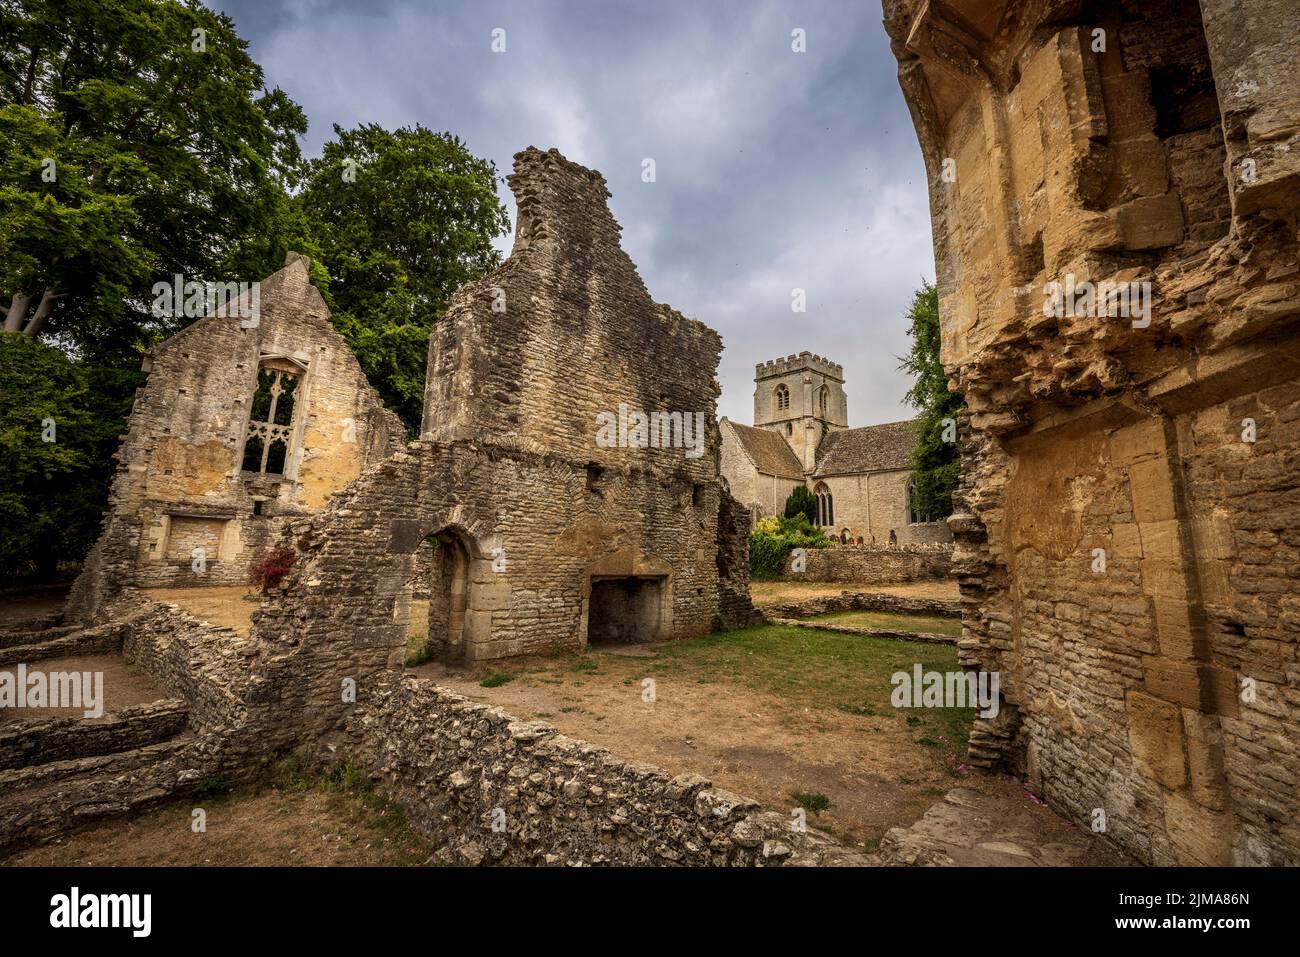 The atmospheric ruins of Minster Lovell Hall with St Kenelm’s Church in the background, Cotswolds, Oxfordshire, England Stock Photo